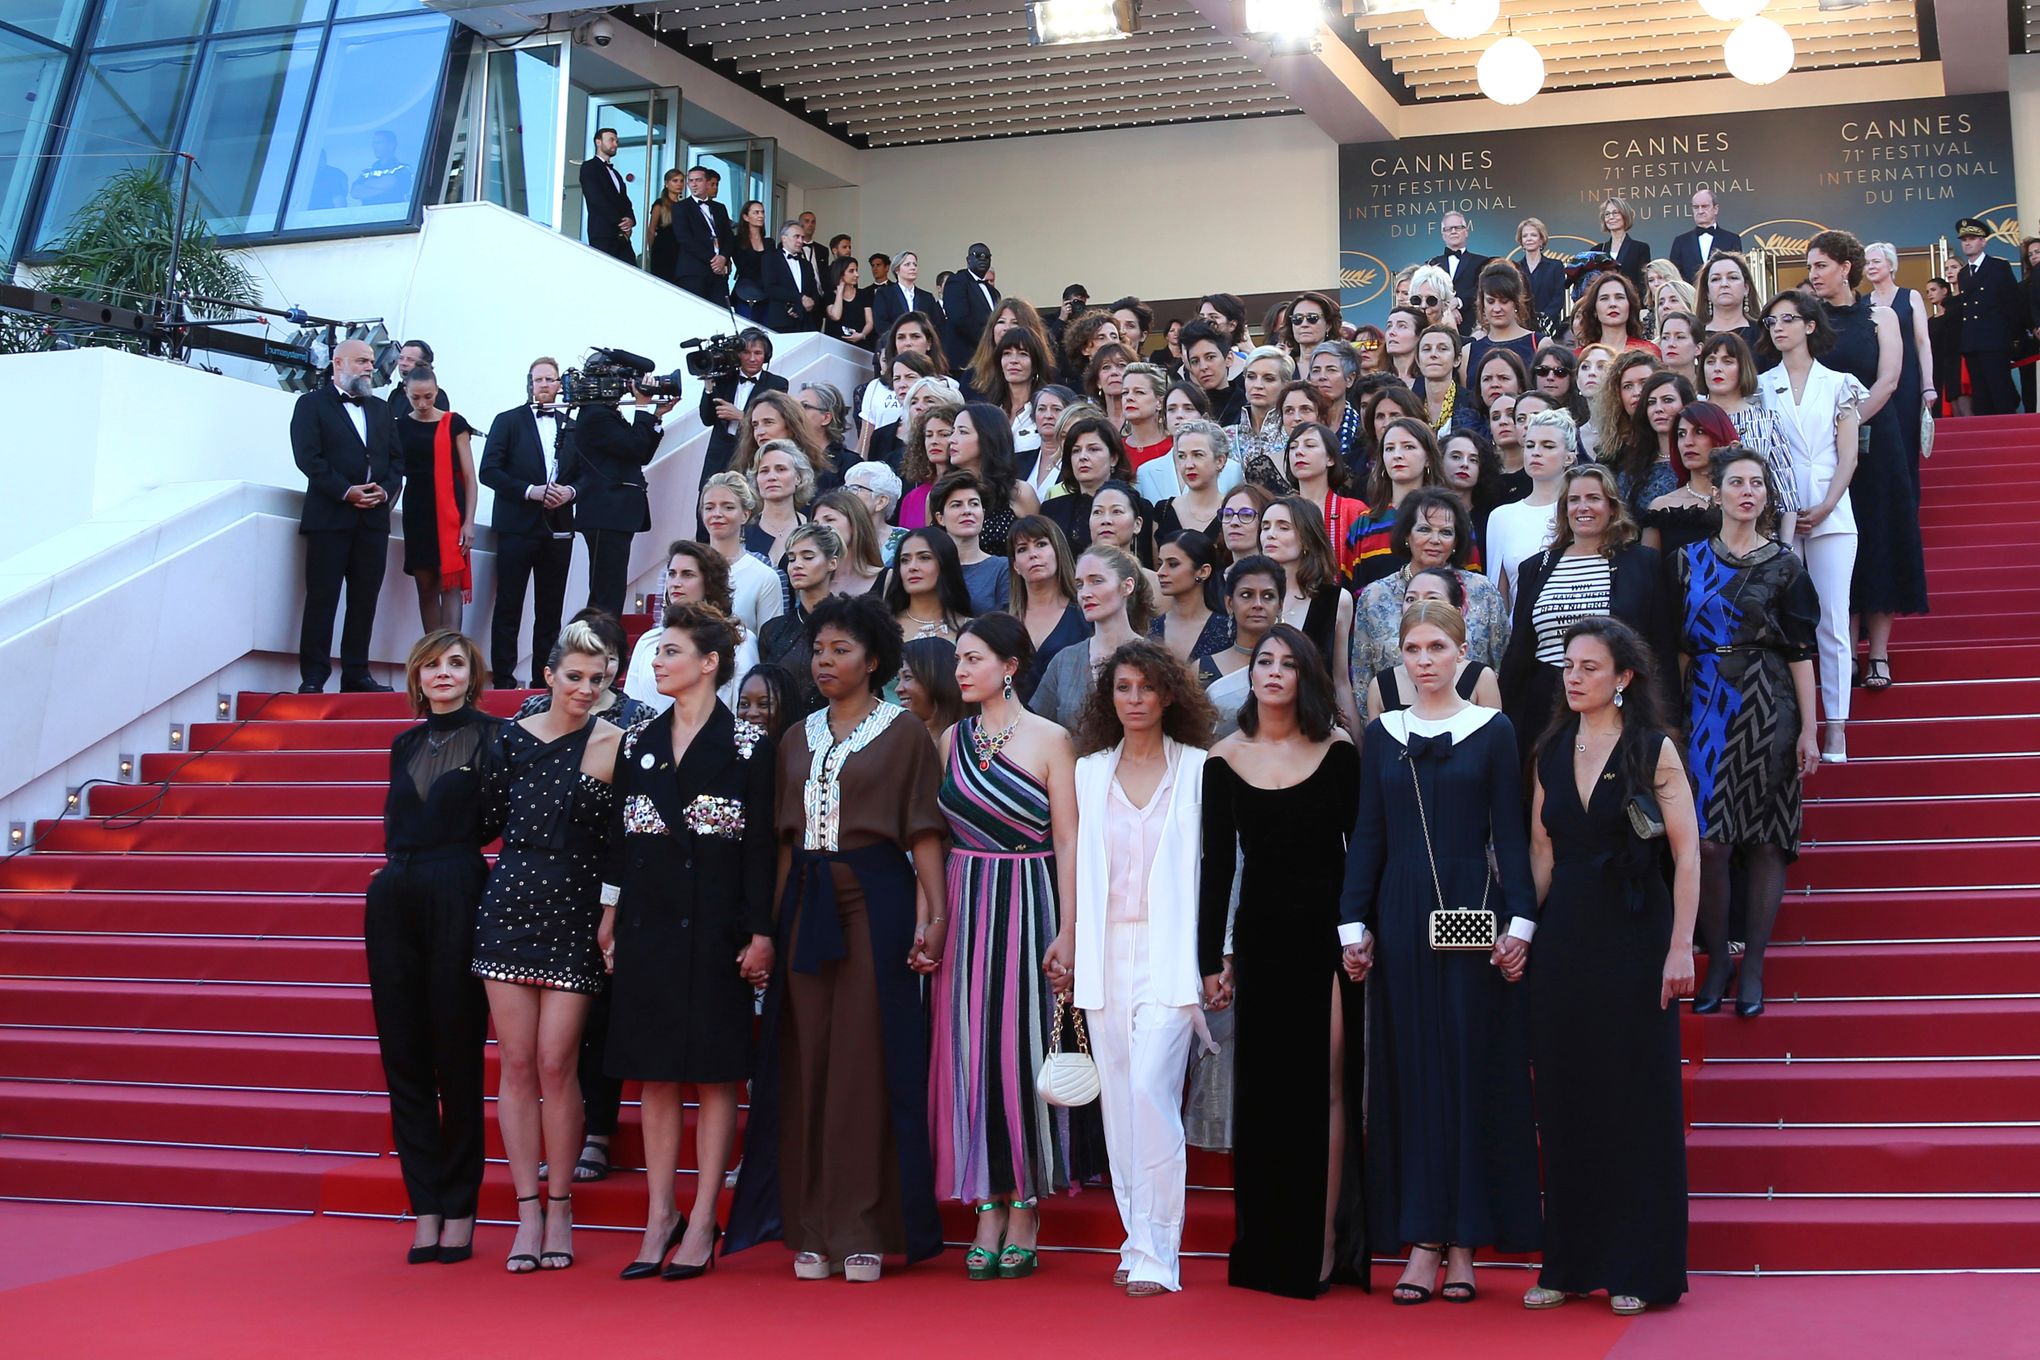 CANNES, FRANCE – MAY 16, 2018: Lea Seydoux walks the red carpet